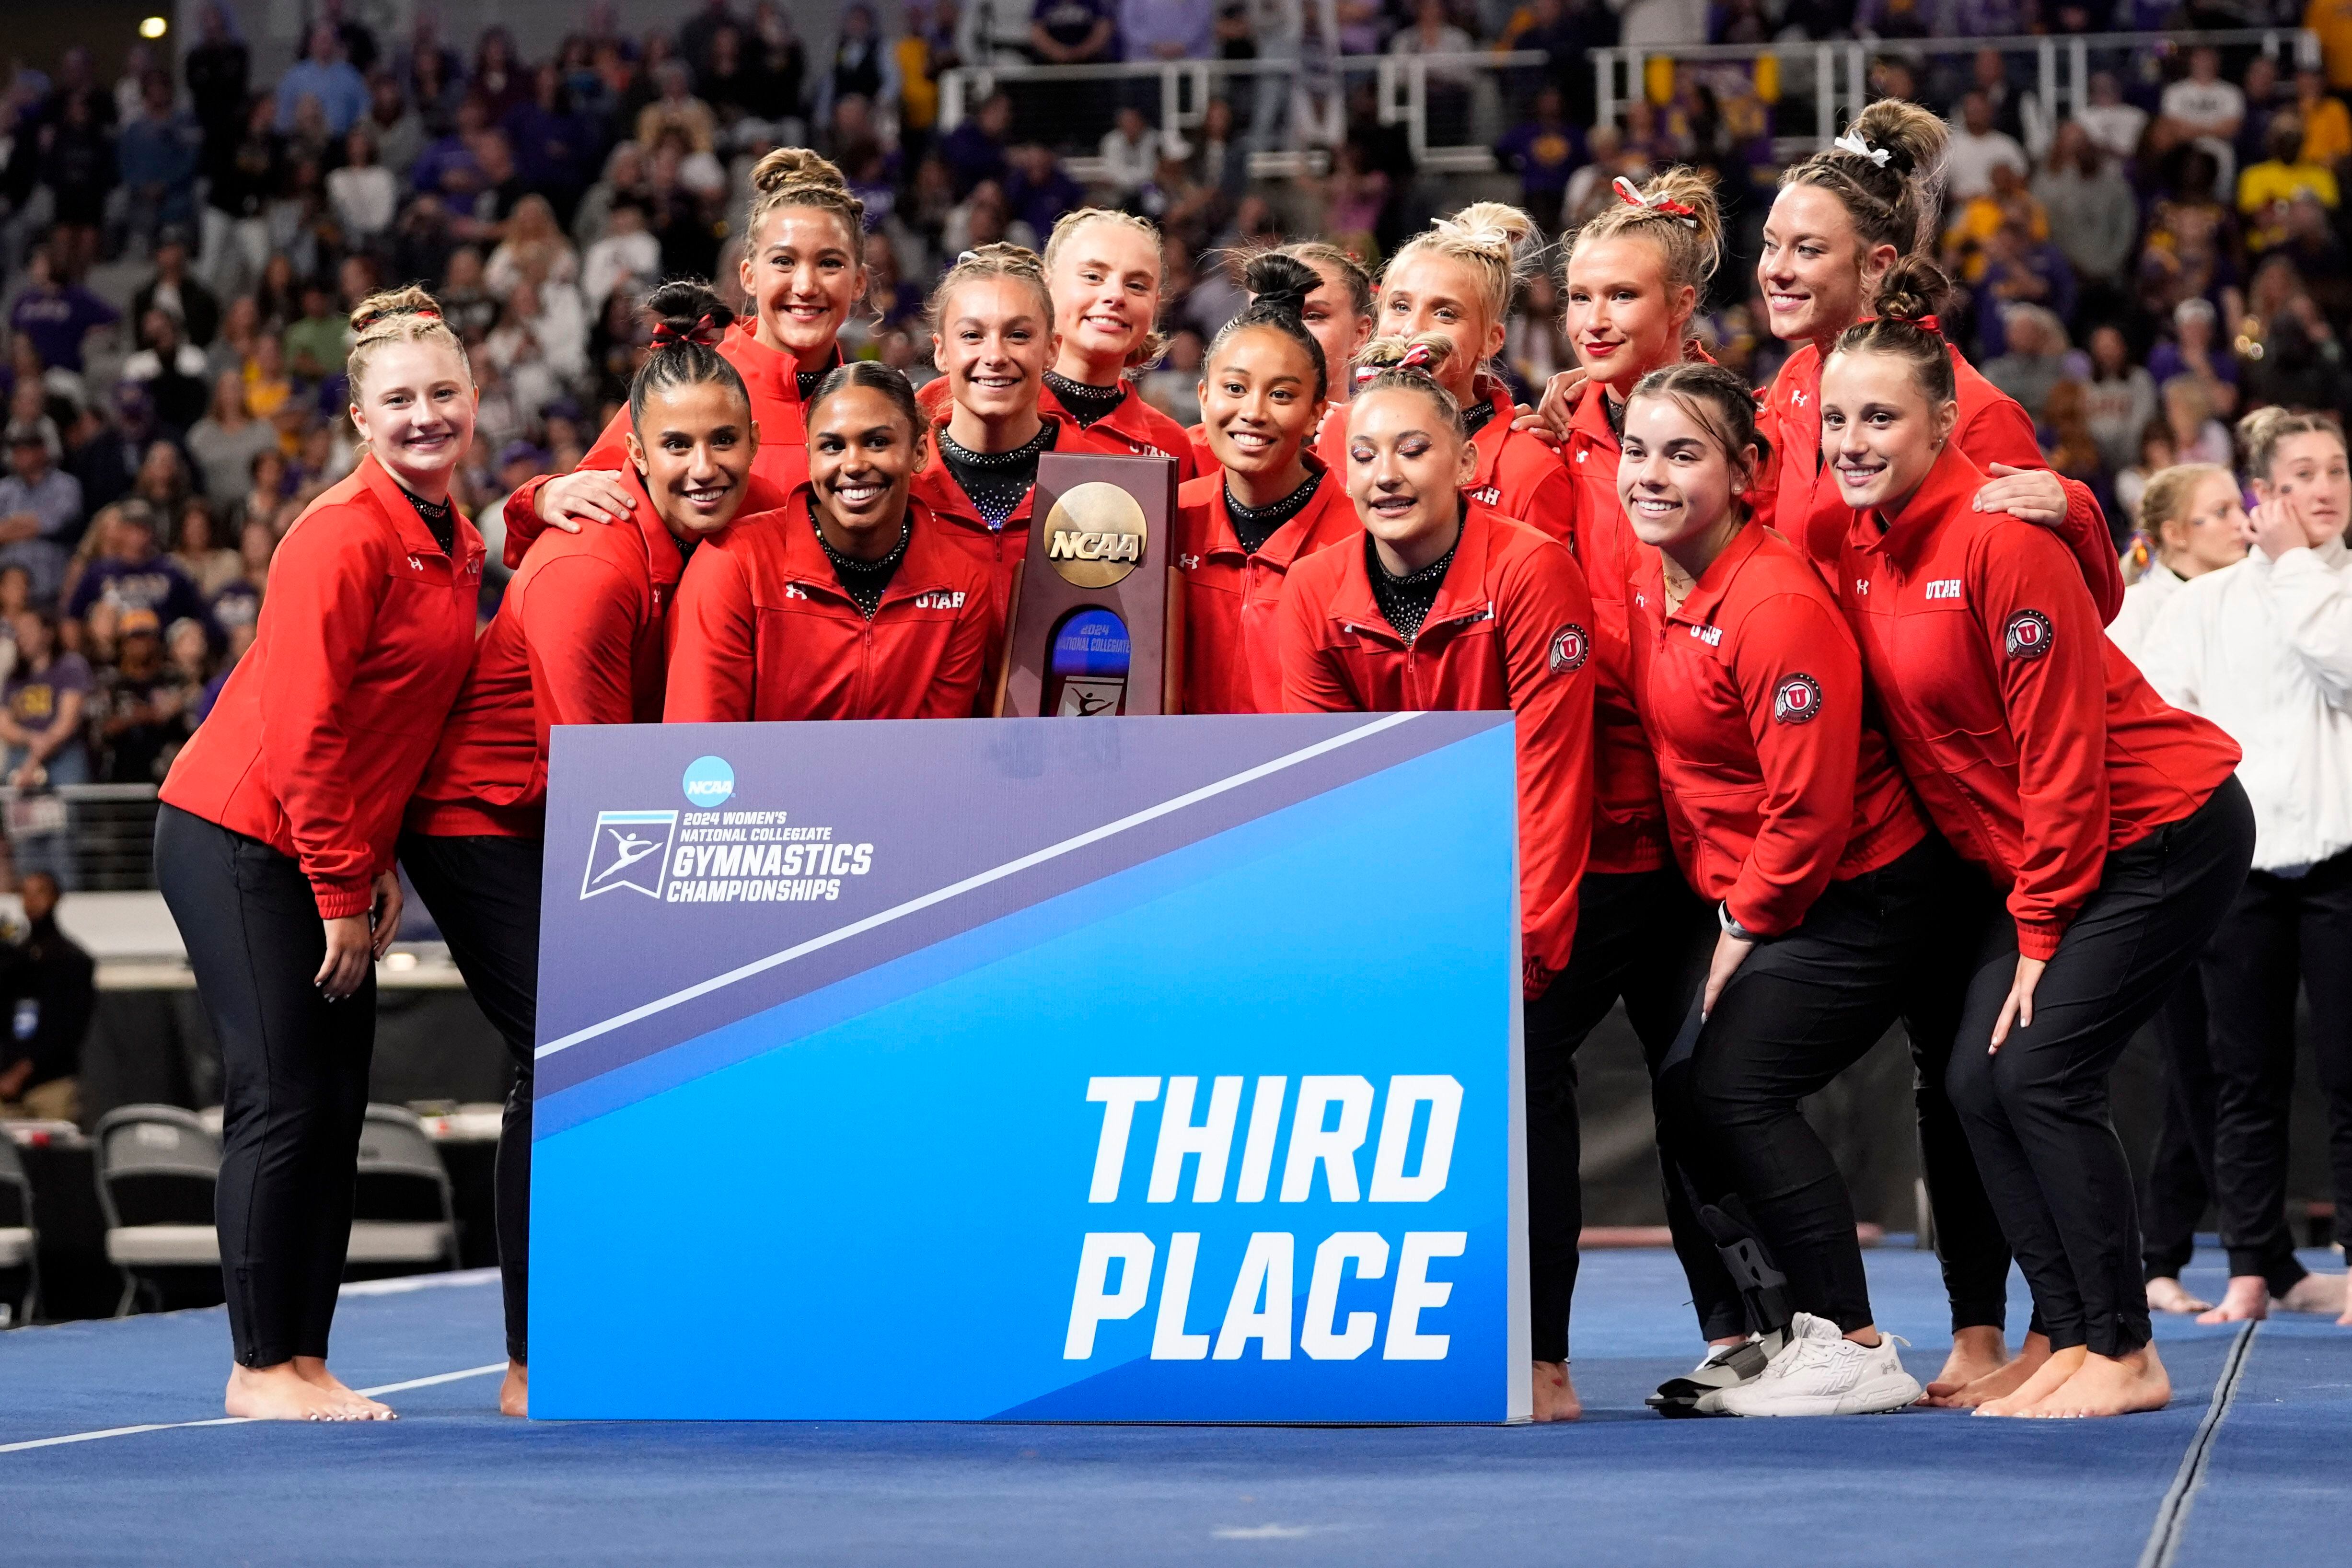 (Tony Gutierrez | AP) Utah competitors pose for photos after taking third place in the NCAA women's gymnastics championships in Fort Worth, Texas, Saturday, April 20, 2024.